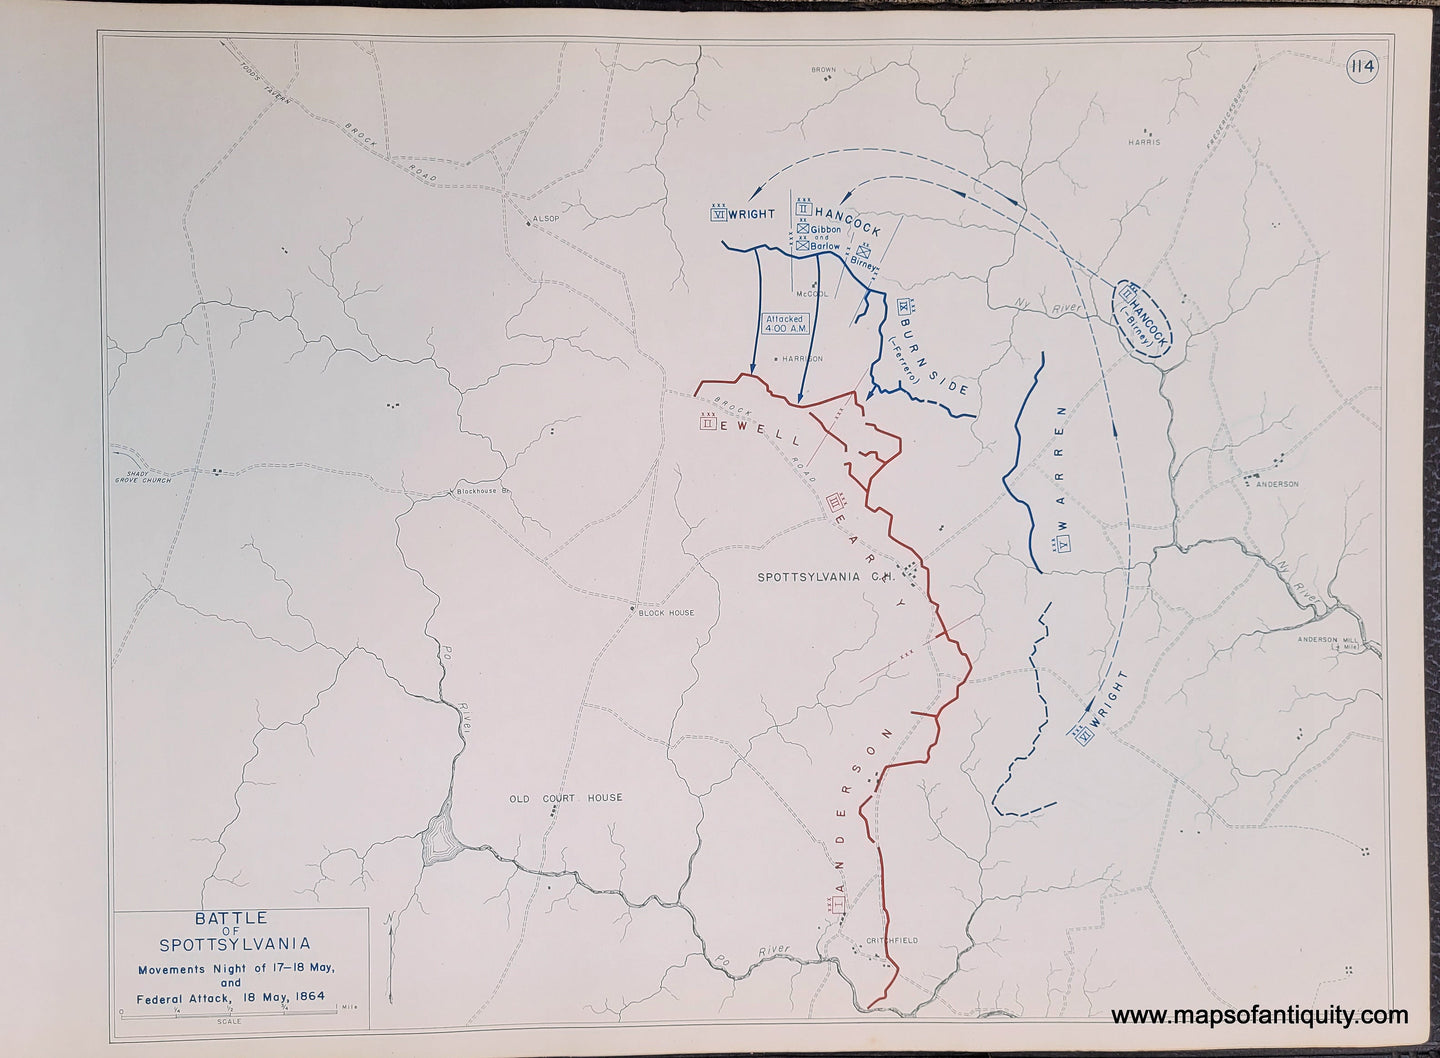 Genuine-Antique-Map-Battle-of-Spottsylvania-Movements-night-of-17-18-May-and-Federal-Attack-18-May-1864-1948-Matthew-Forney-Steele-Dept-of-Military-Art-and-Engineering-US-Military-Academy-West-Point-Maps-Of-Antiquity